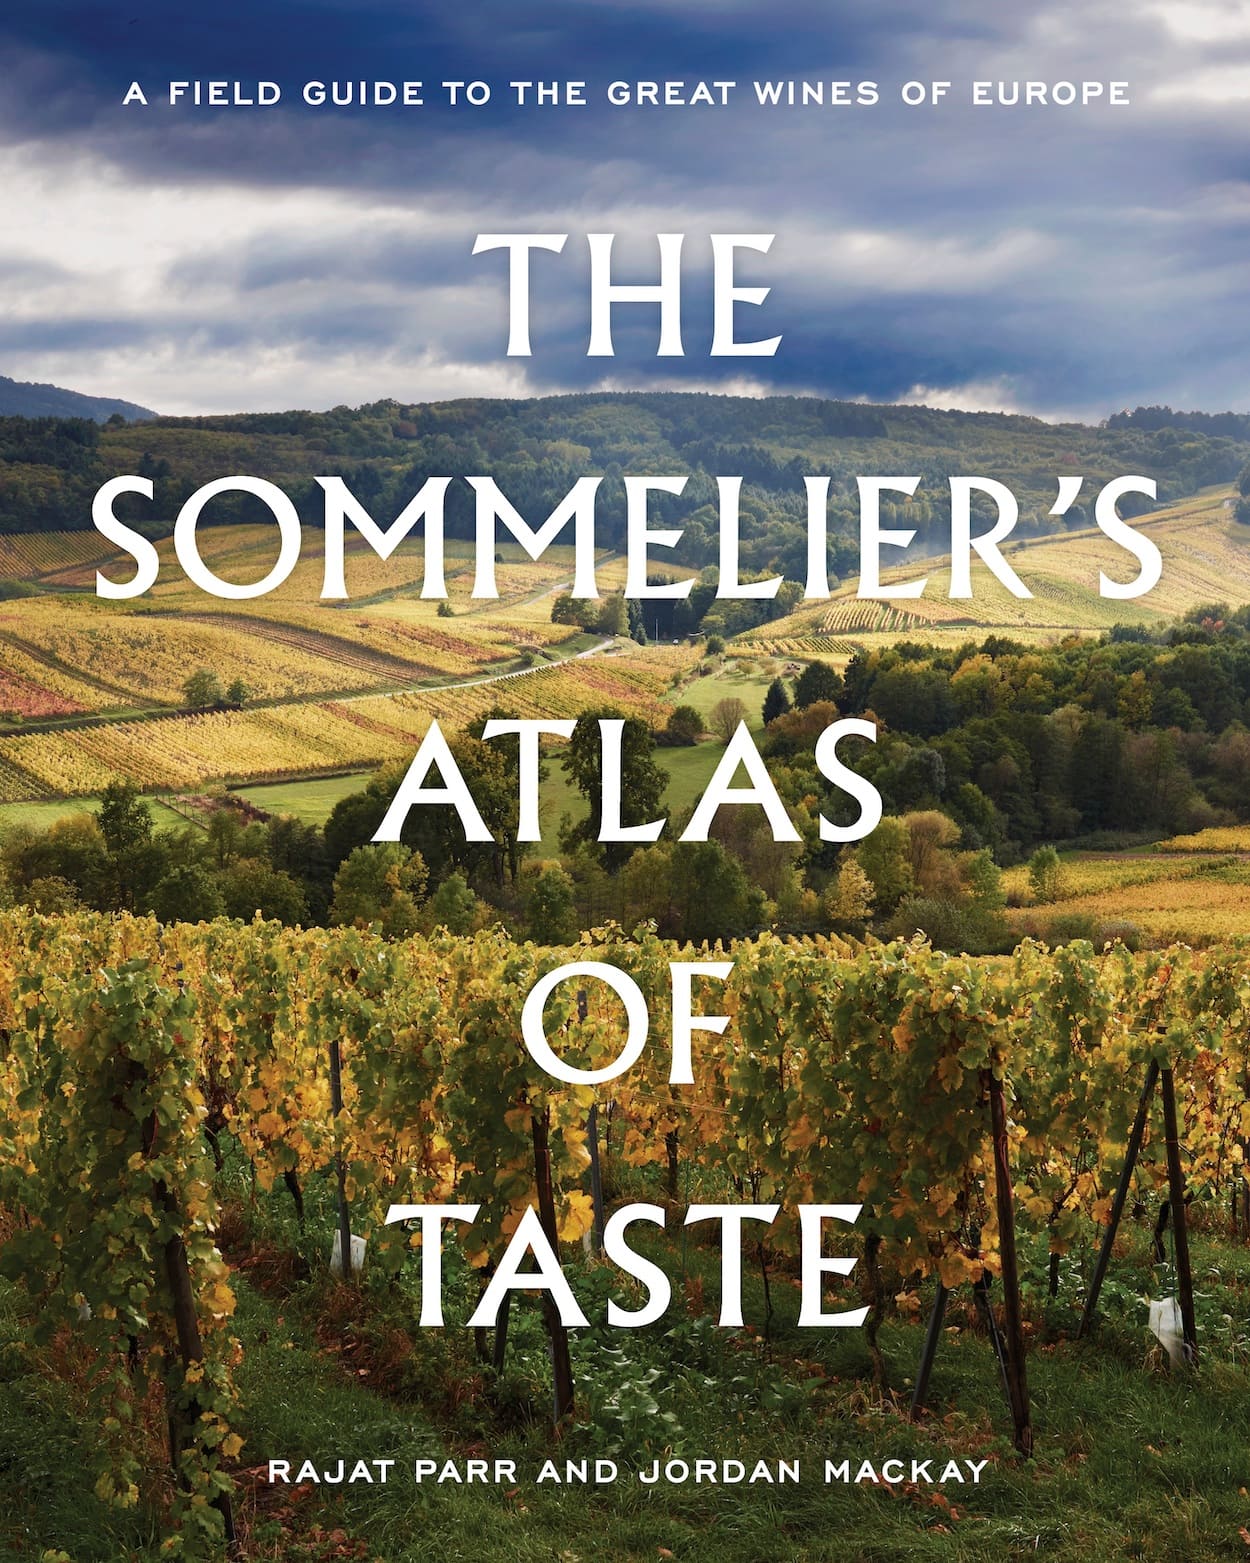 a field guide to the great wines of europe's book